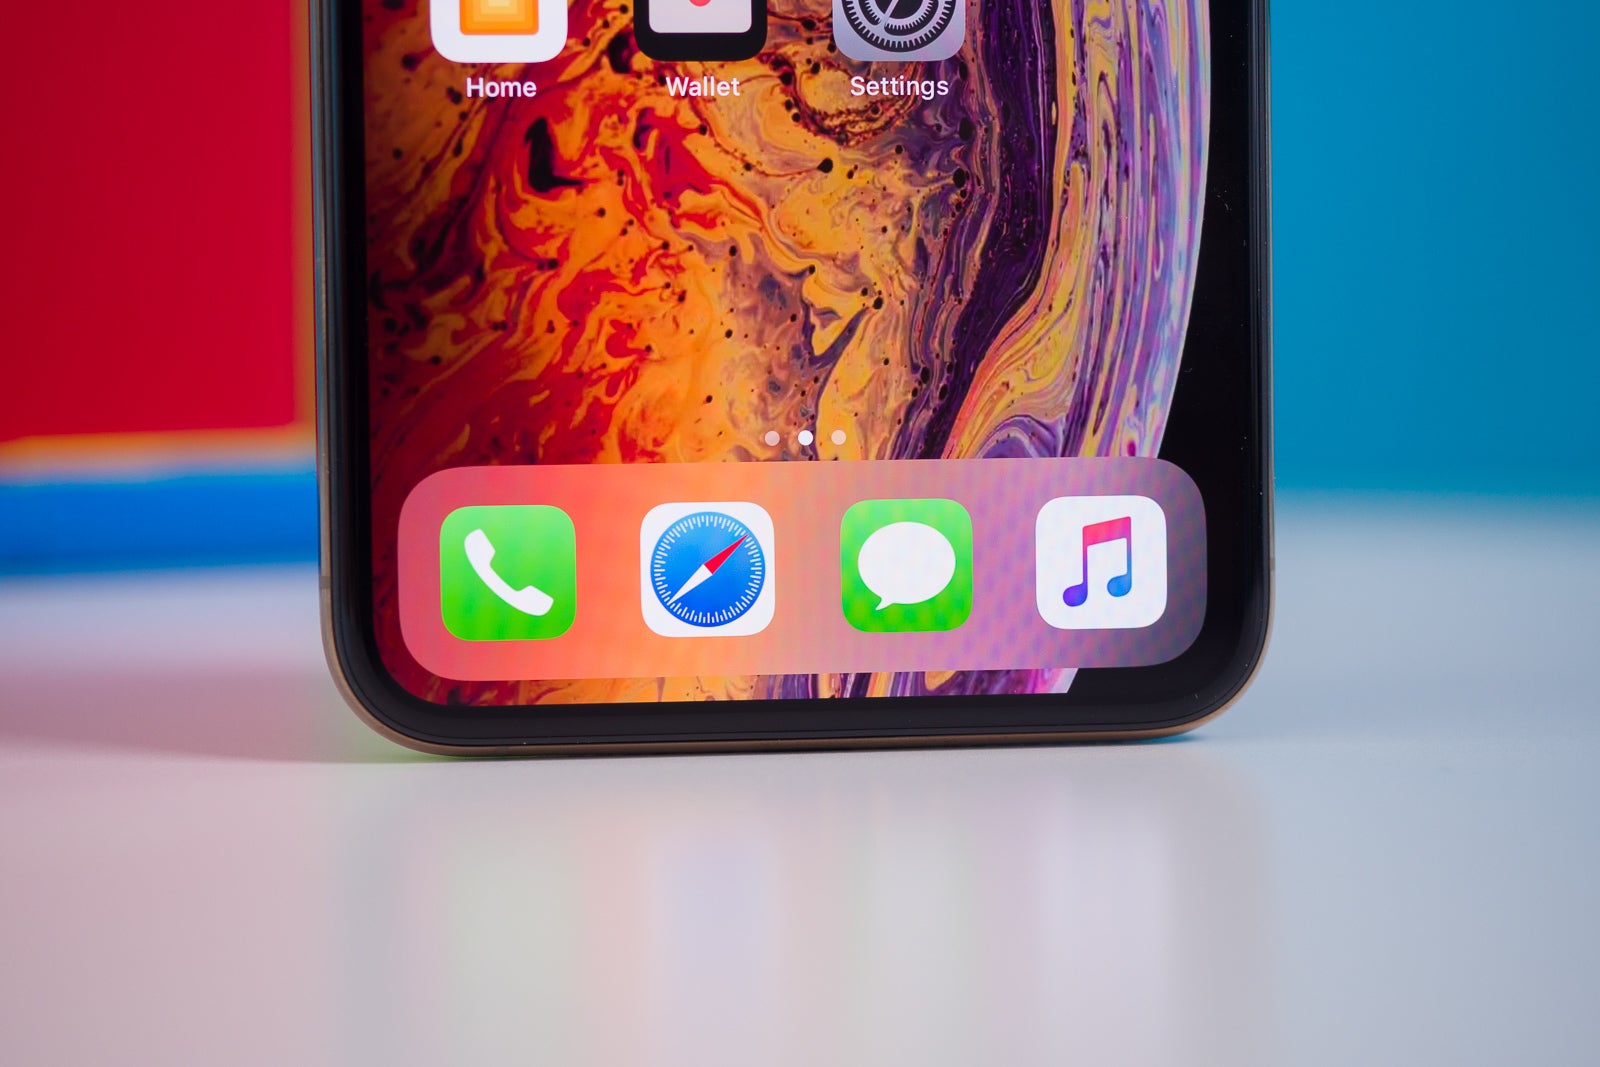 The Apple iPhone XS Max - 2019 iPhones to feature new antenna structure that improves indoor navigation